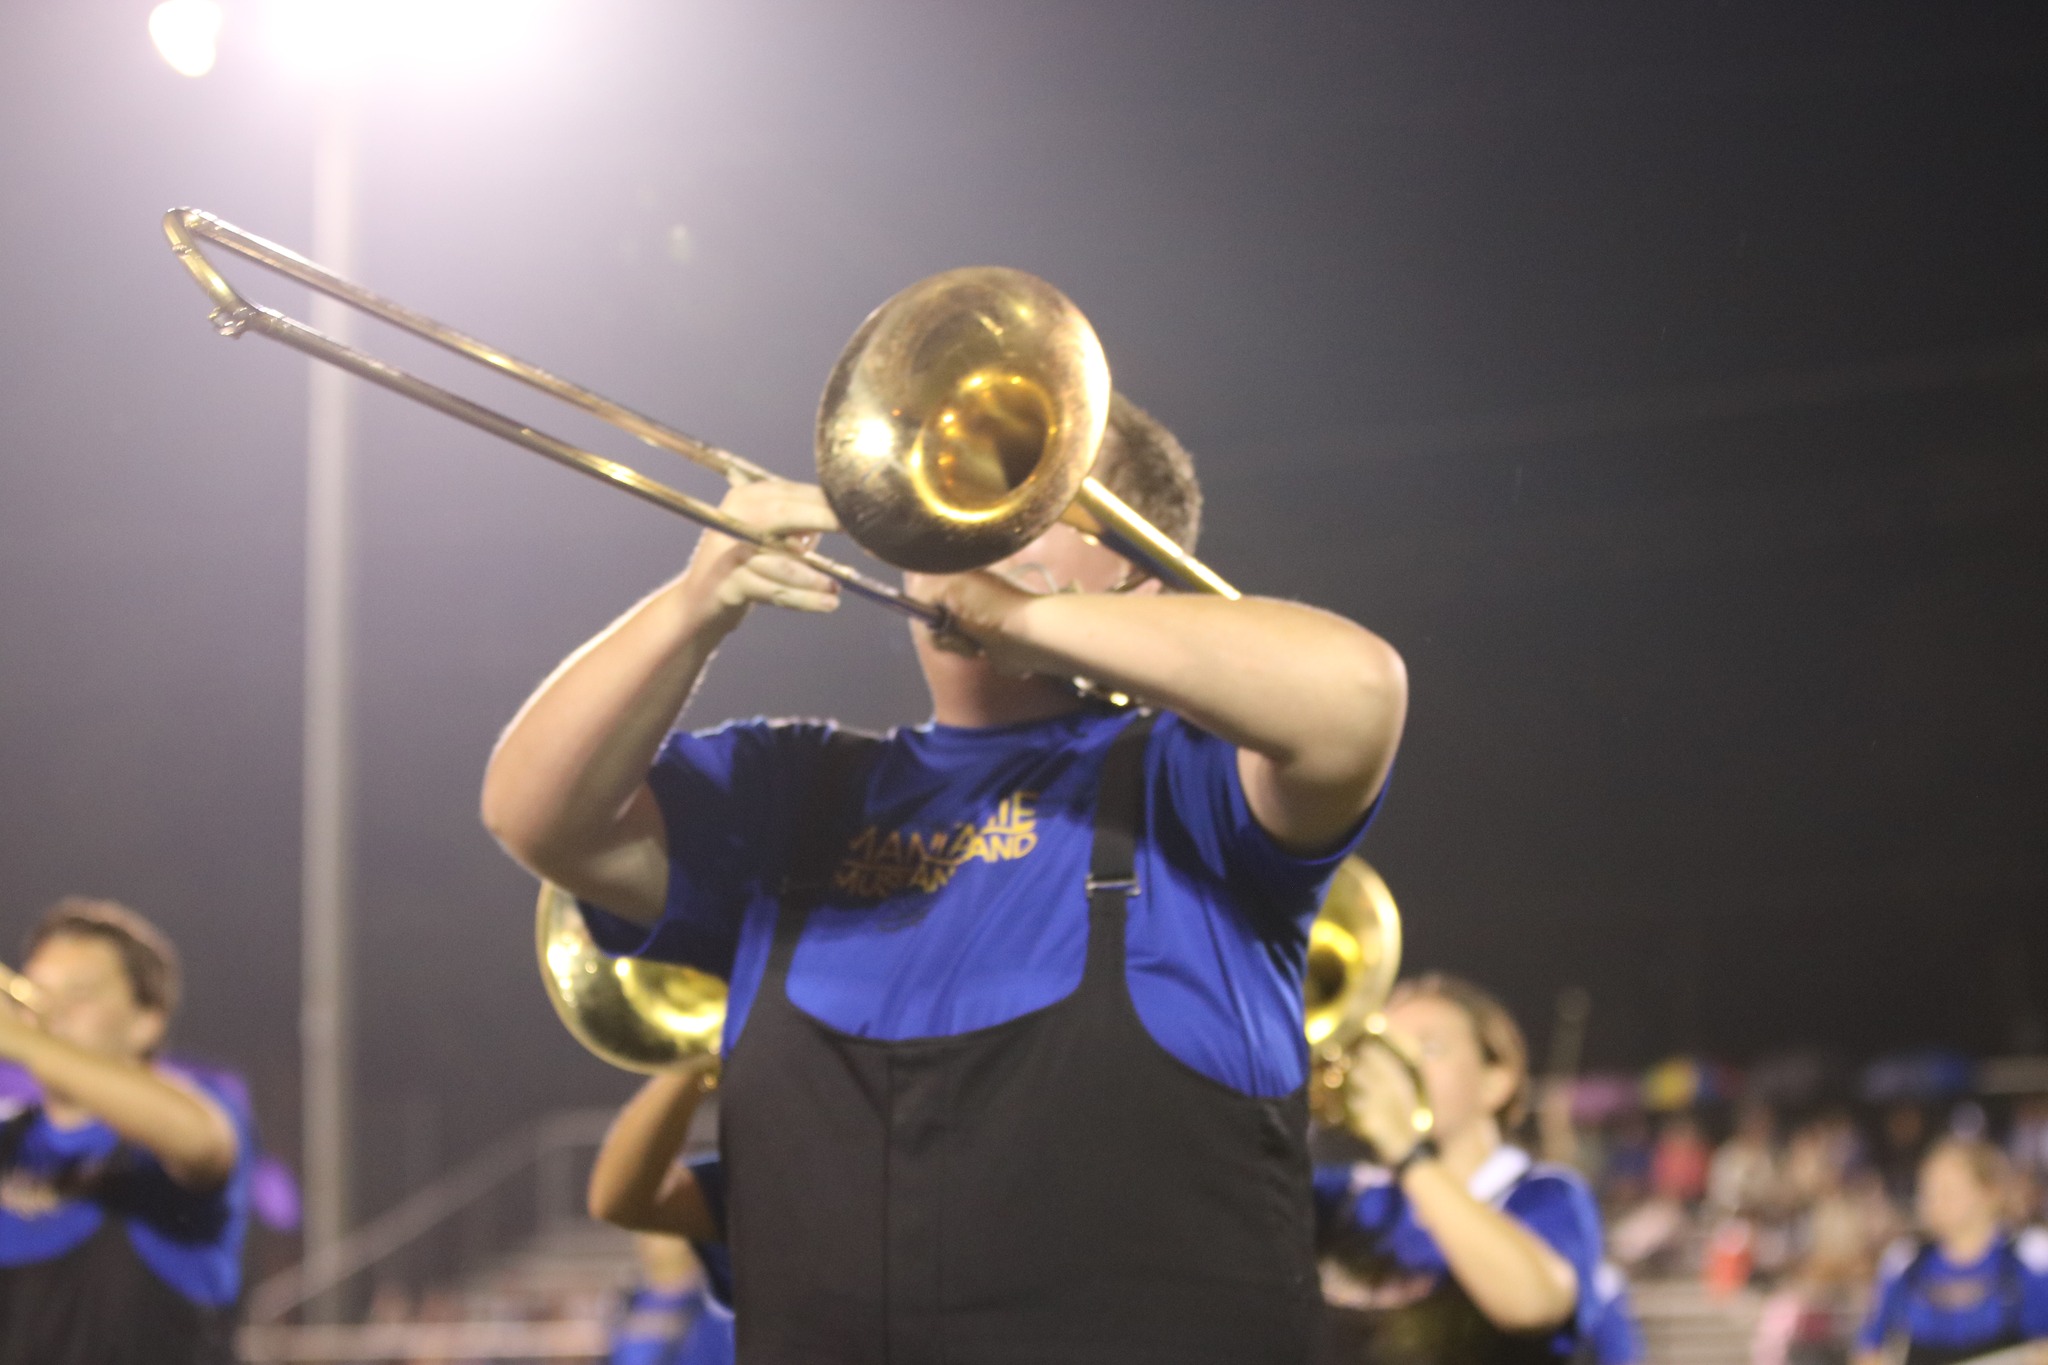 Band Candid Horn Line